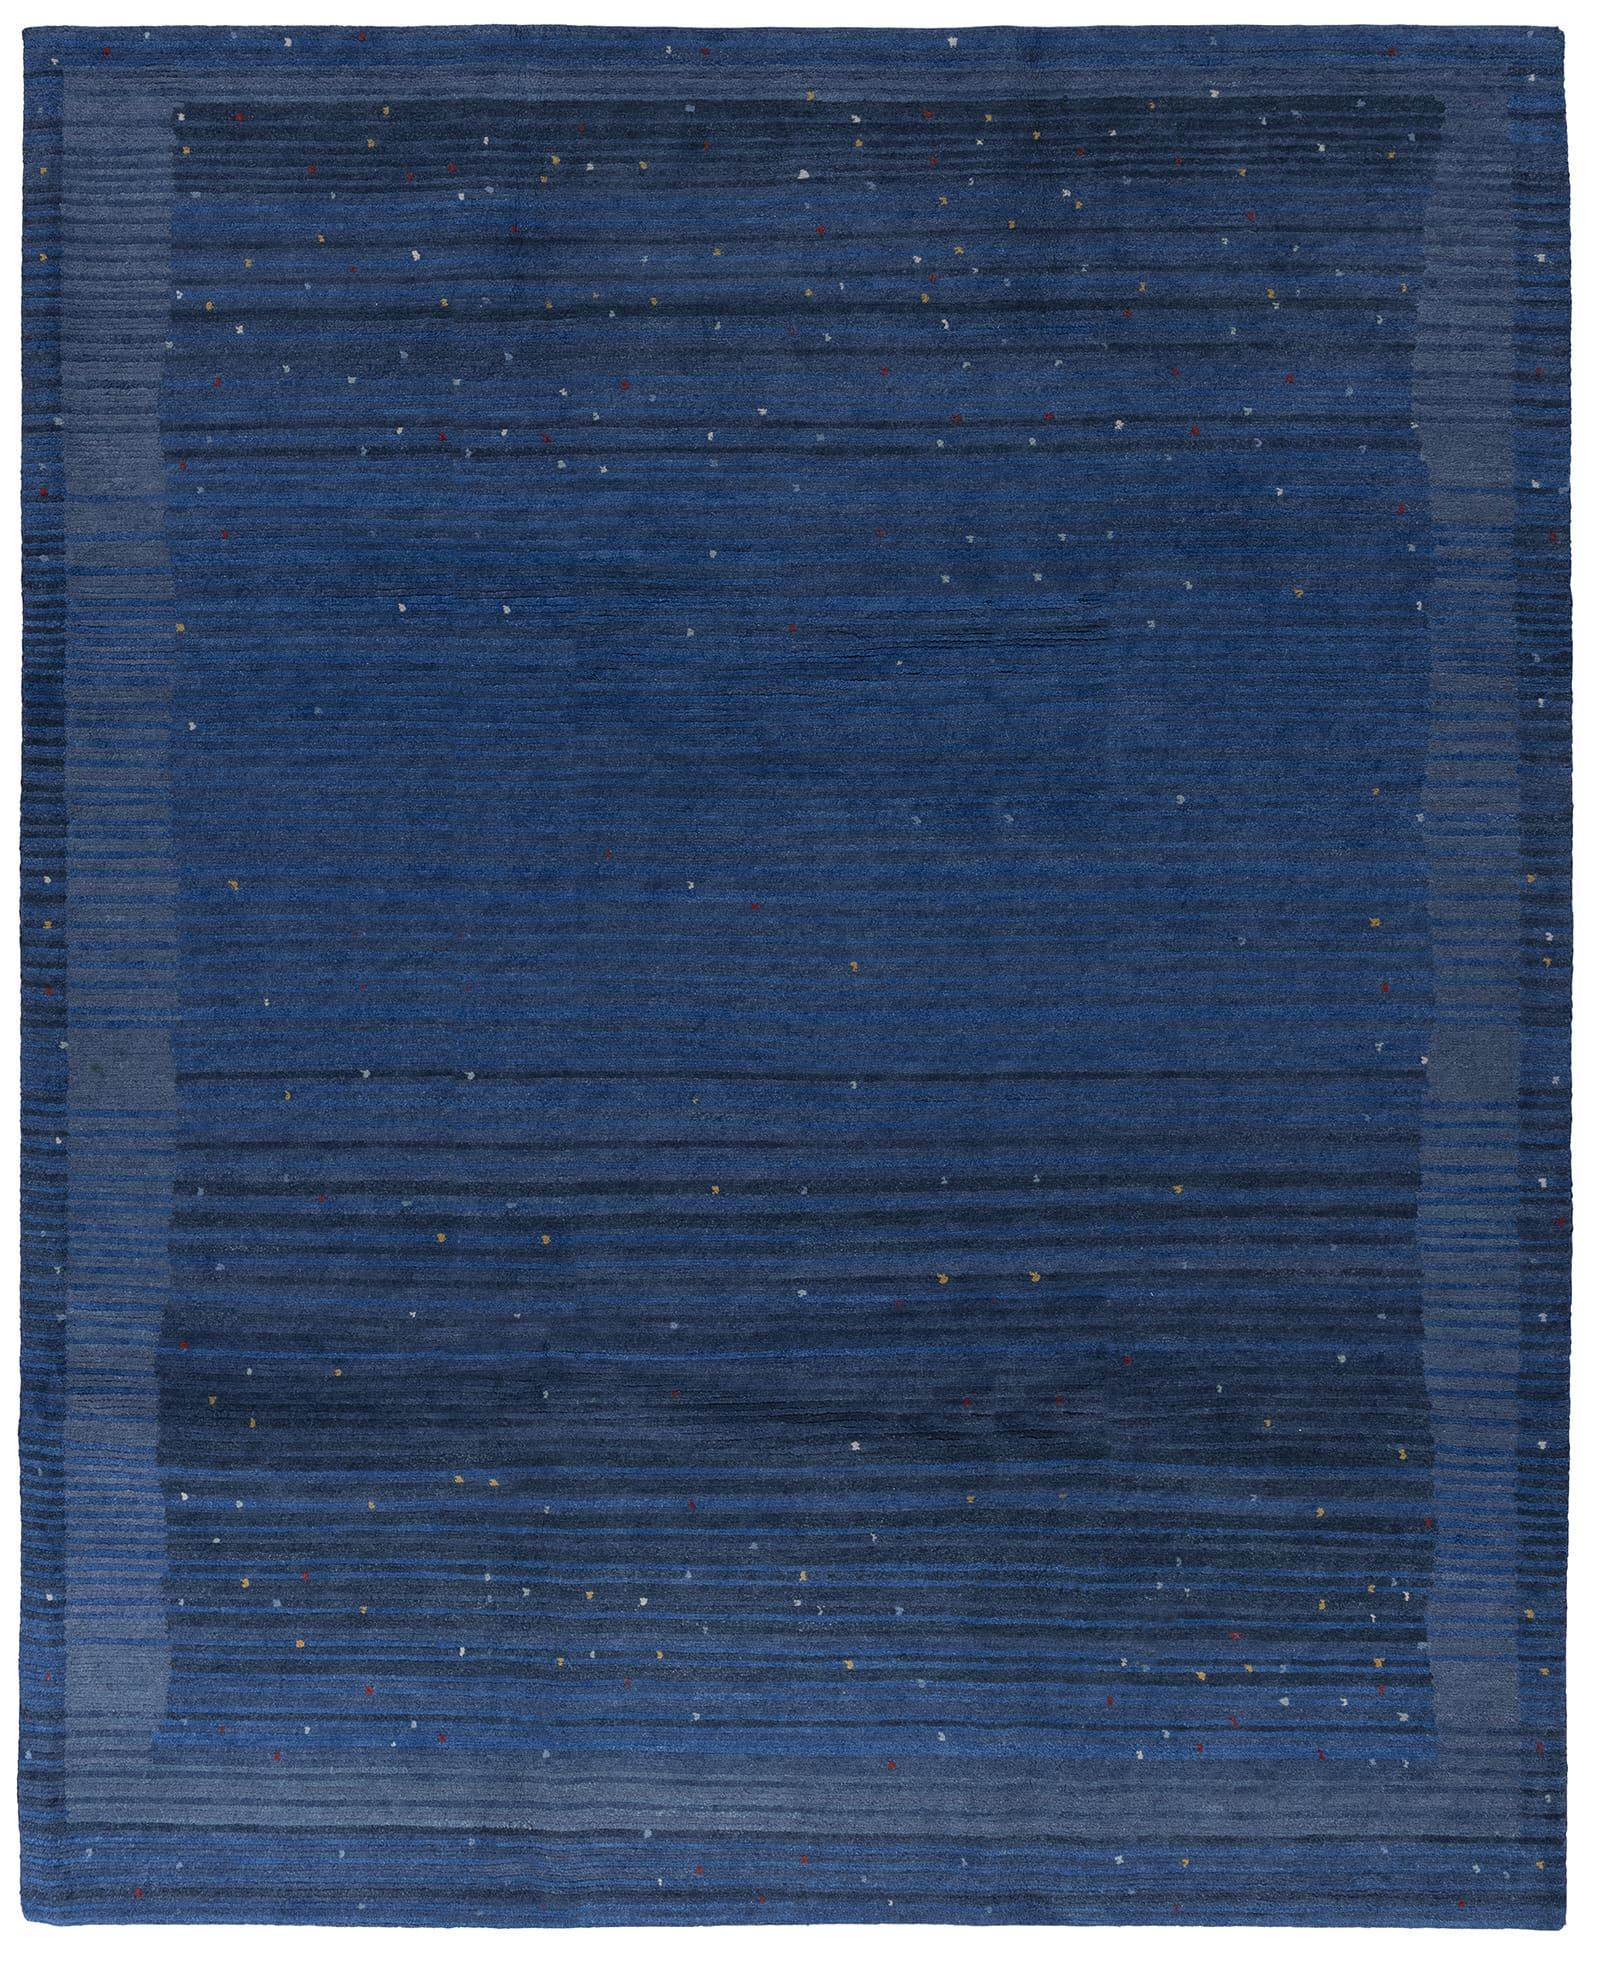 Experience the luxurious Serenity Indigo 8 X 10, a unique colorway with a calming, handcrafted line motif made from the finest wool. This elegant and versatile rug rendered in shades of indigo blue will elevate any space.